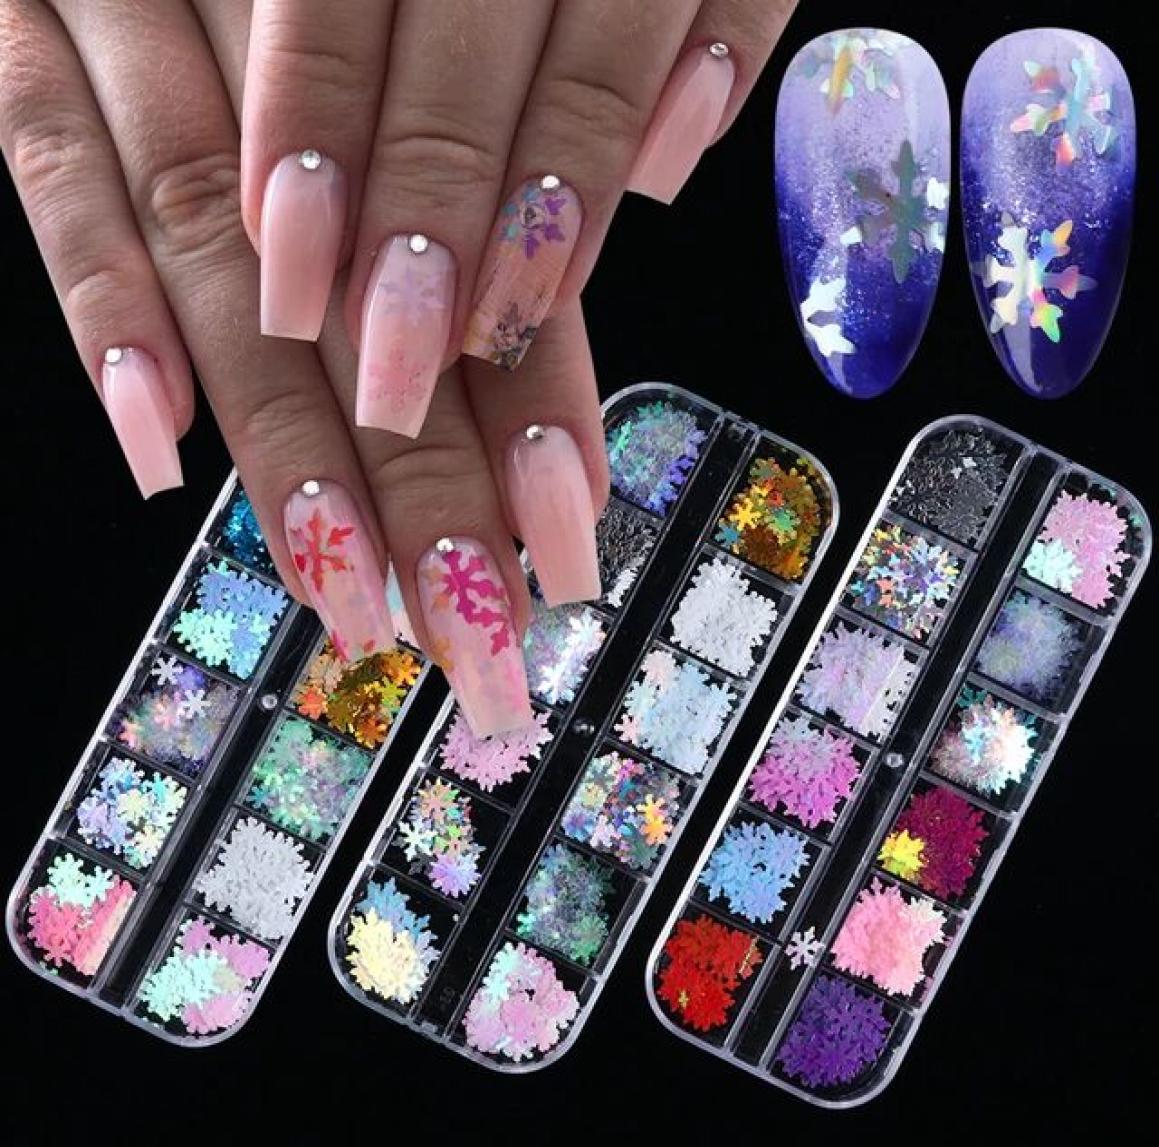 

Mixed 12 Colors Holographic Snowflakes Xmas Nail Sequins Glitter Christmas Nail Art Decorations Stickers 3D Flakes Charms5882568